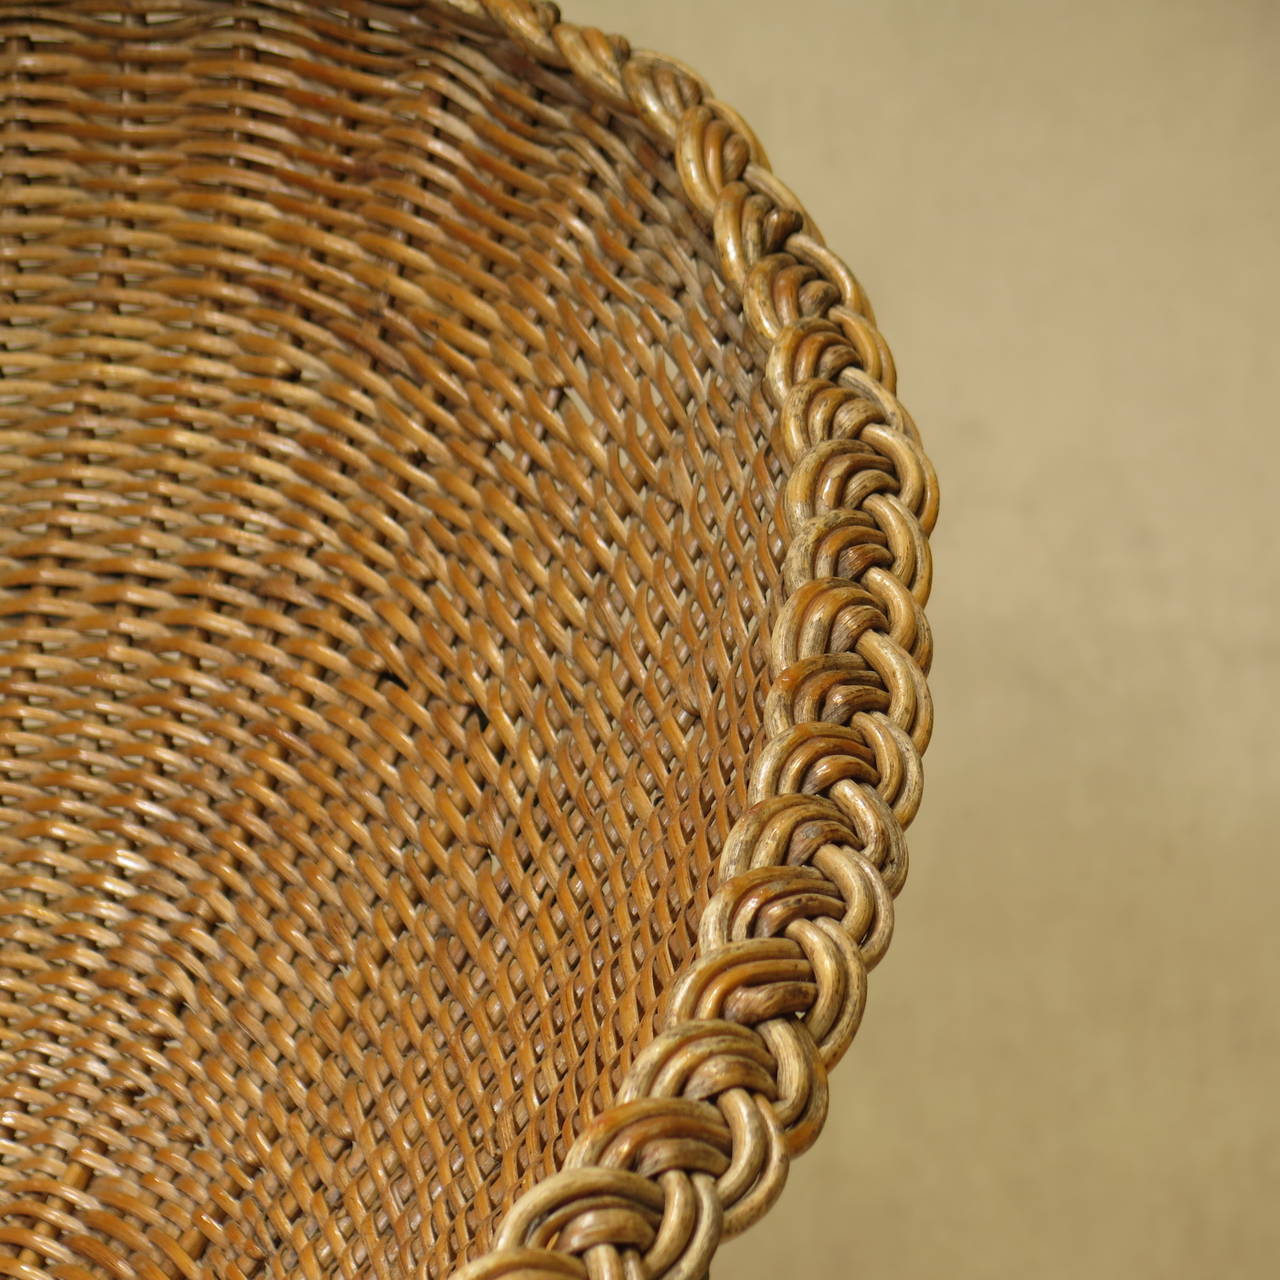 20th Century Wicker and Iron Lounge Chair, France, 1950s For Sale